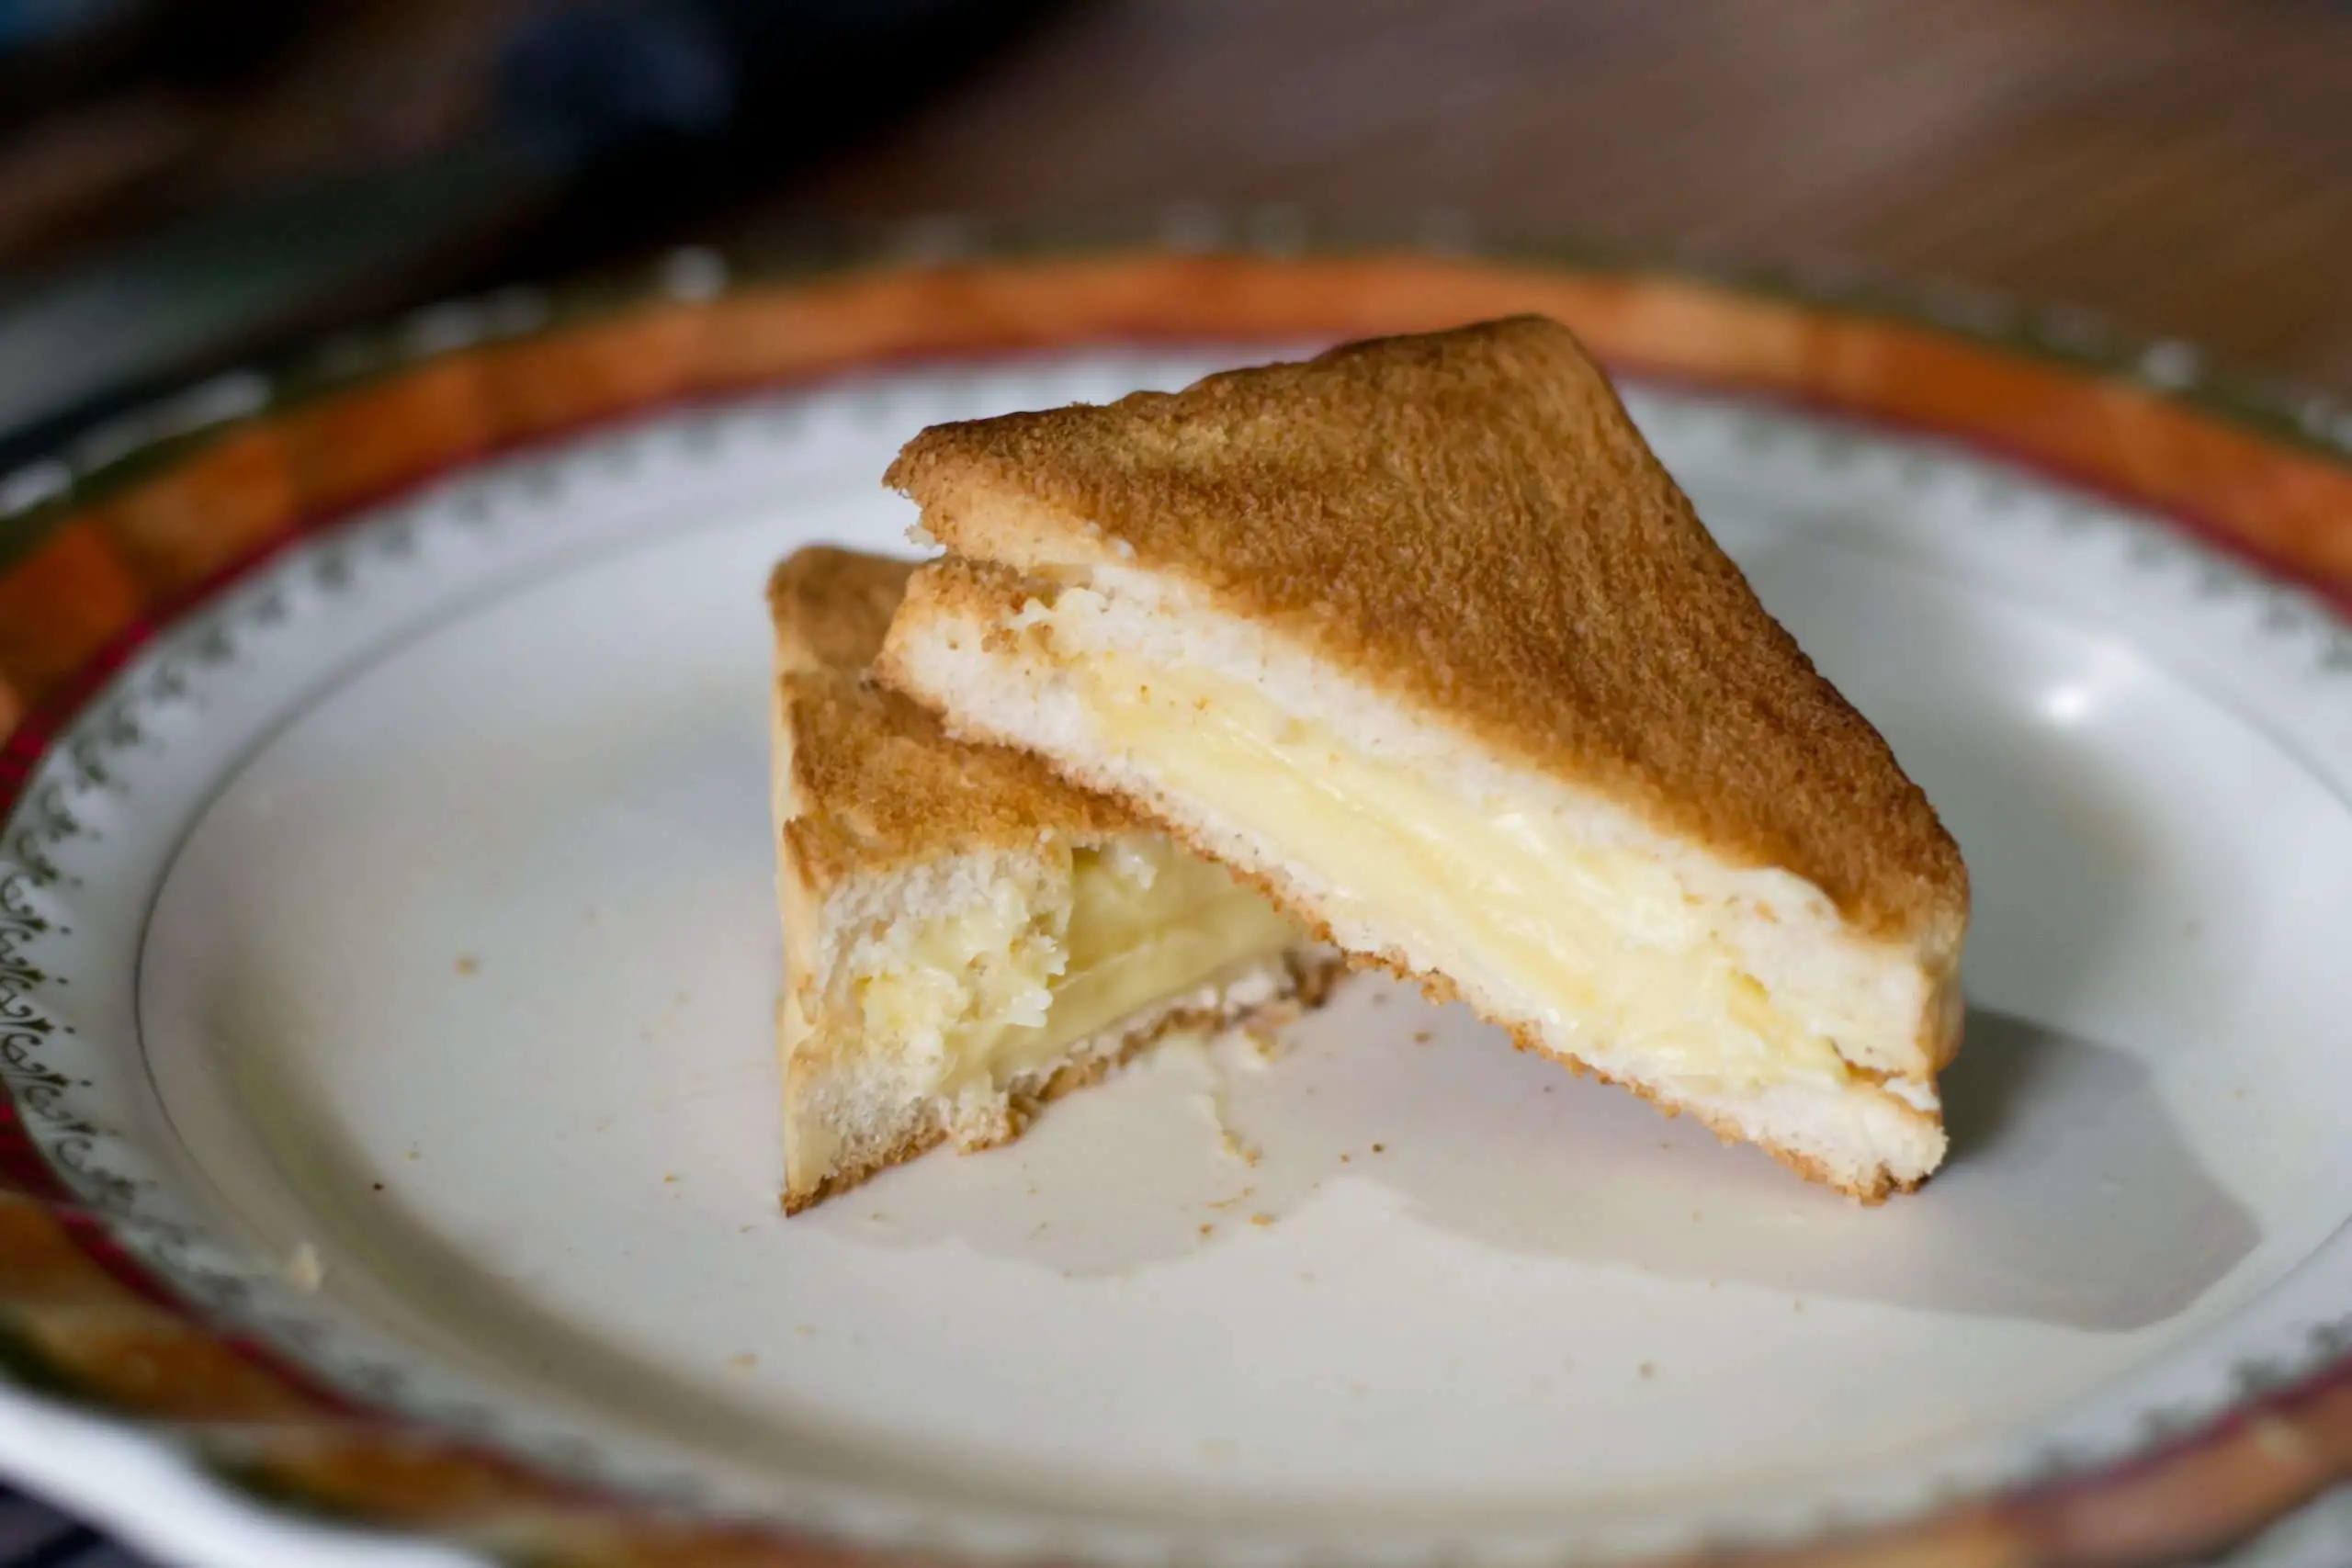 How to Make a " Grilled"  Cheese Sandwich in a Toaster Oven